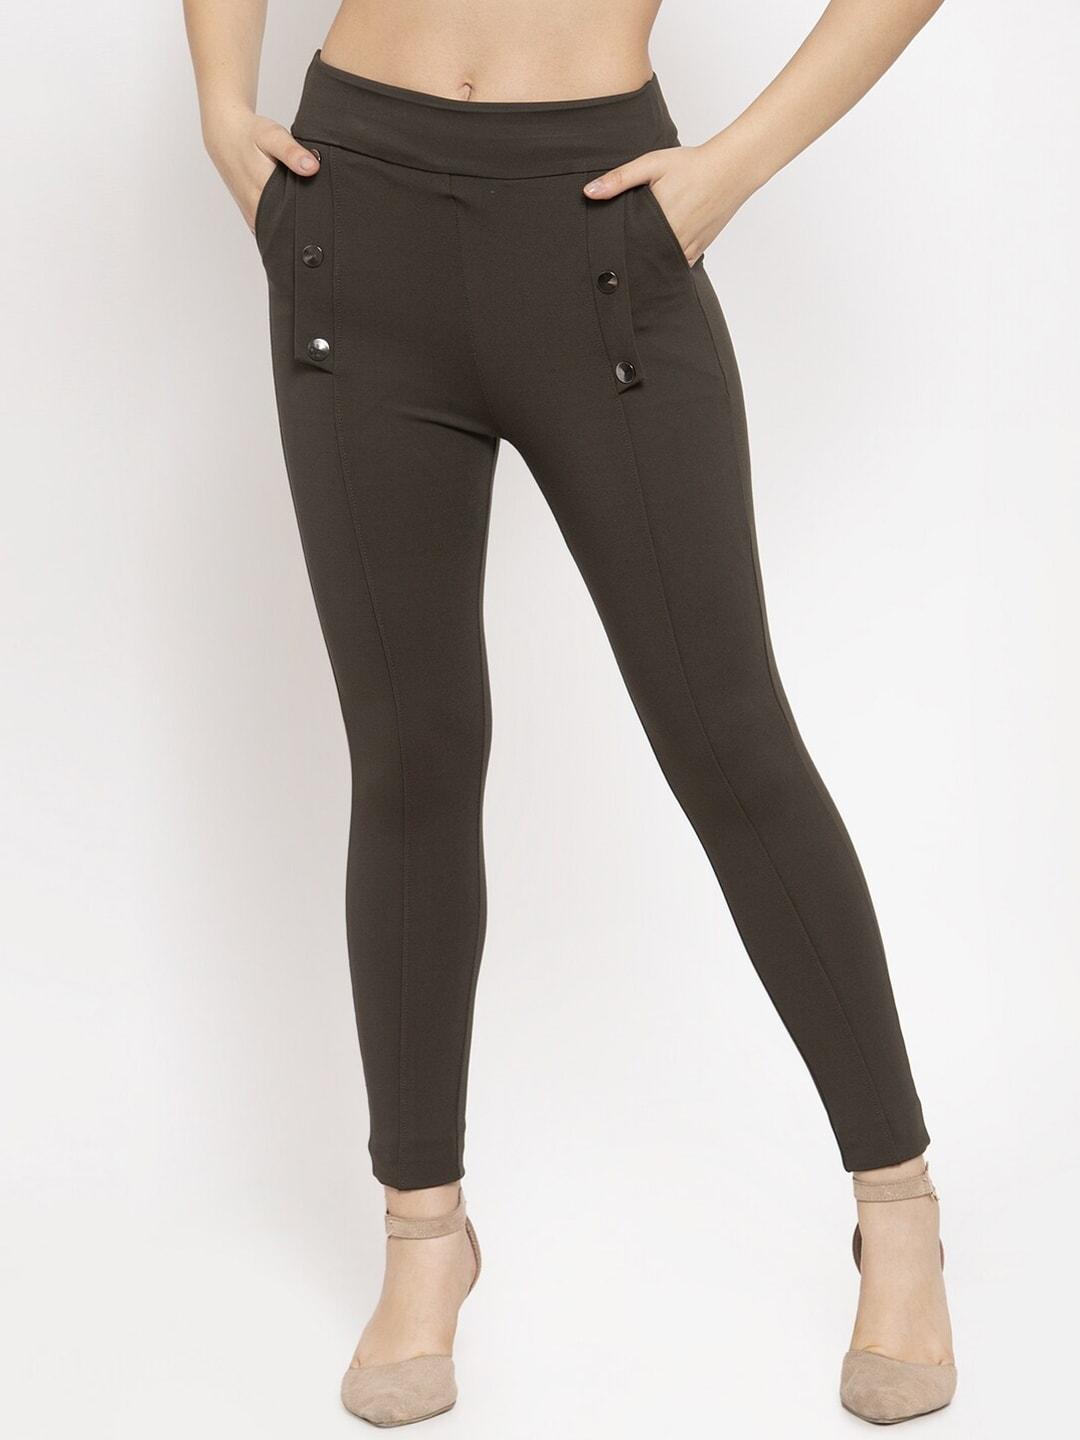 clora-creation-women-olive-solid-jeggings